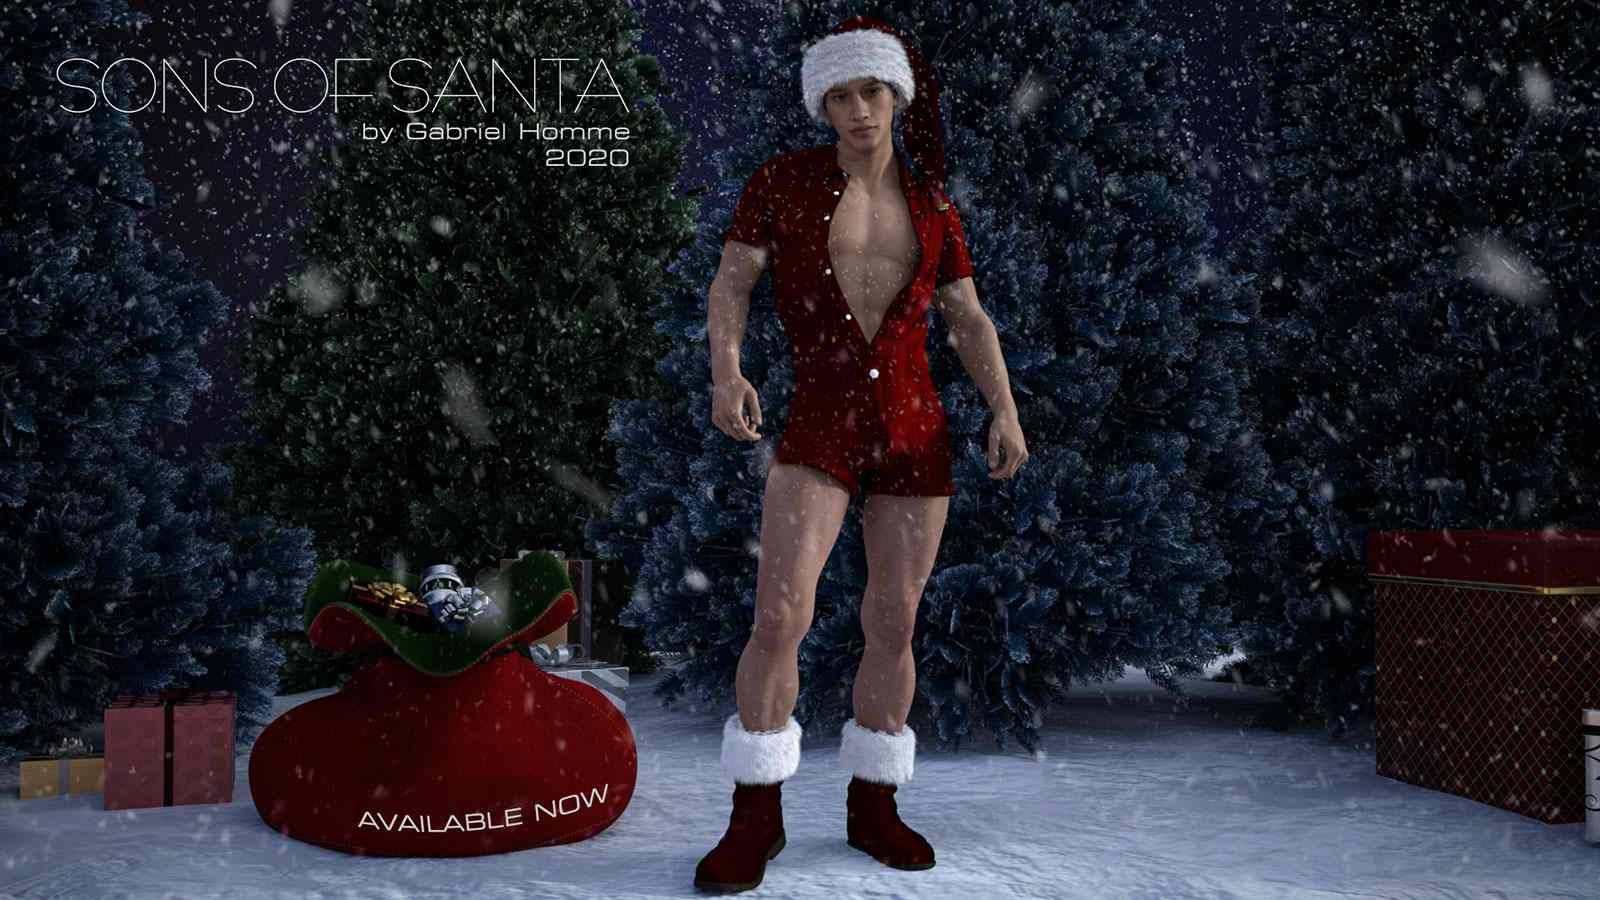 Sons of Santa 2020 [Gabriel Homme] Adult xxx Game Download